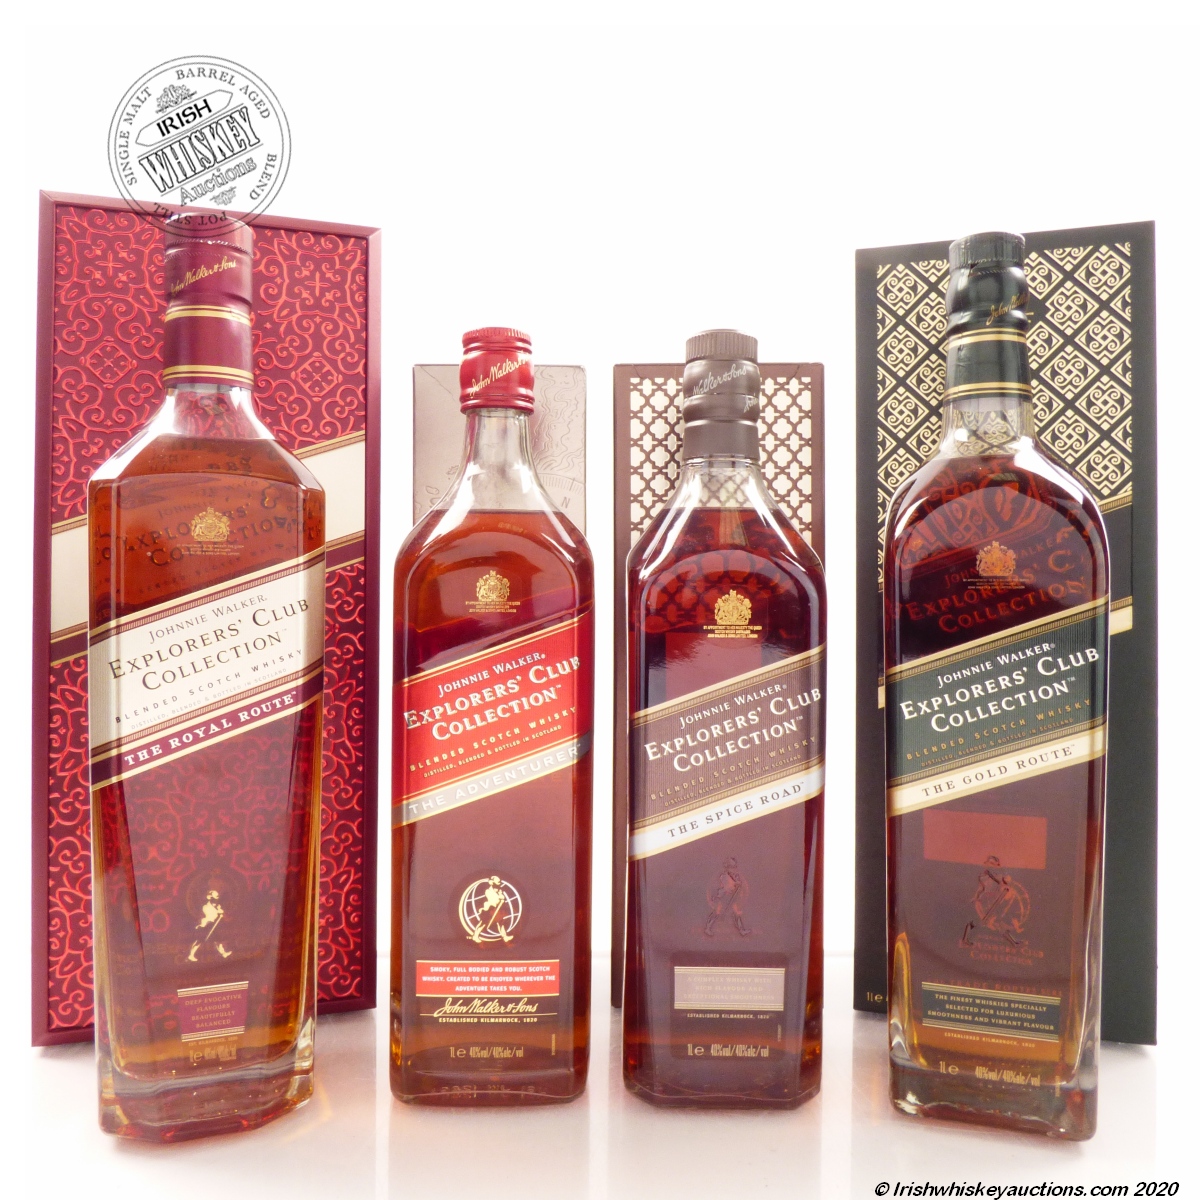 Irish Whiskey Auctions | Johnnie Walker Explorers Club Collection